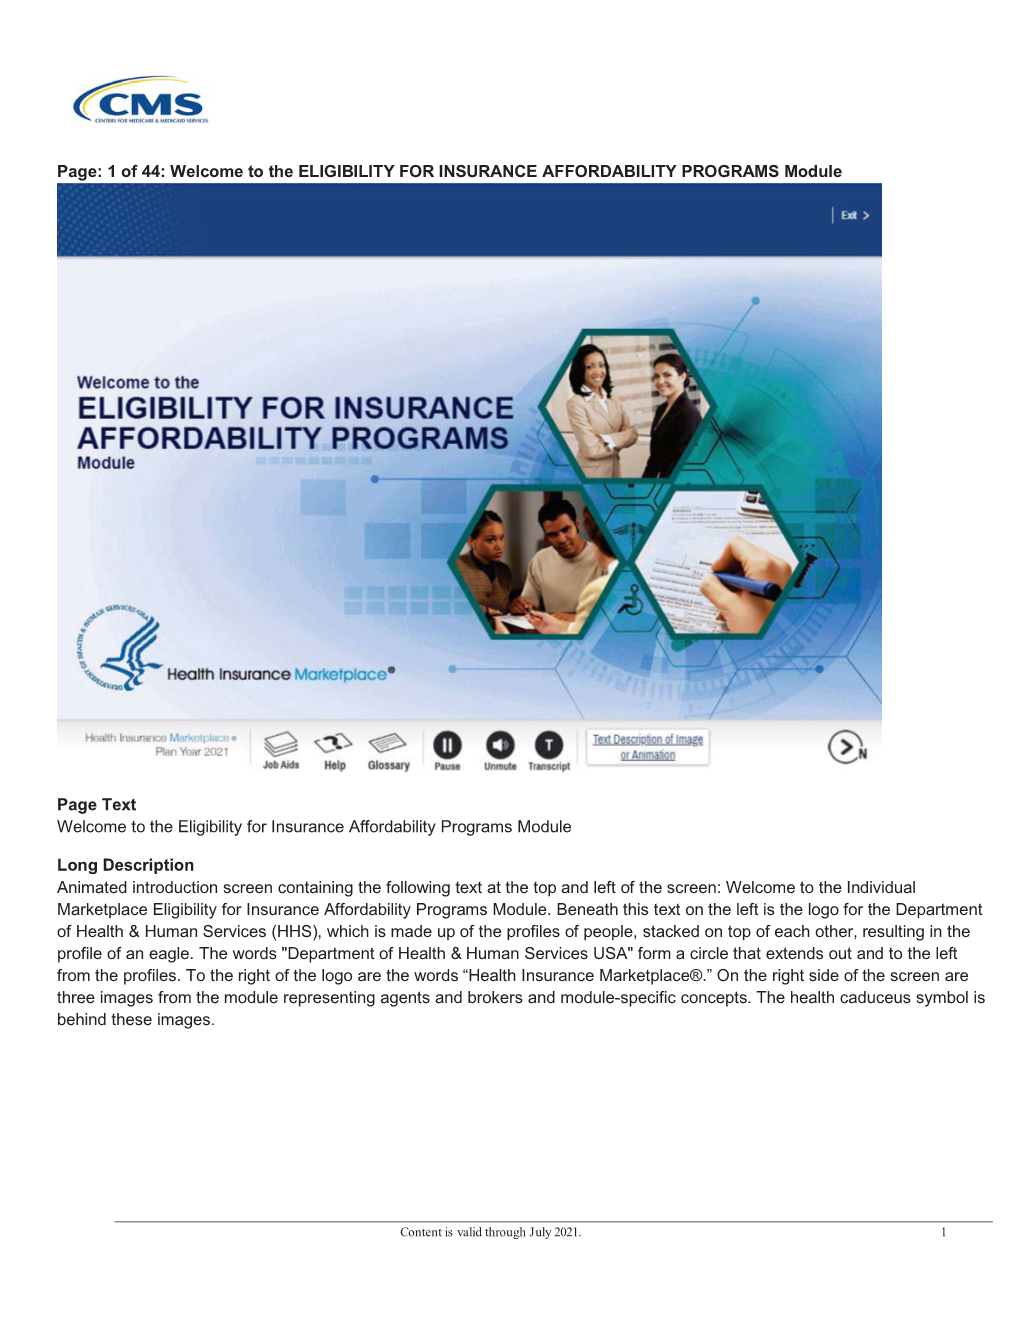 ELIGIBILITY for INSURANCE AFFORDABILITY PROGRAMS Module